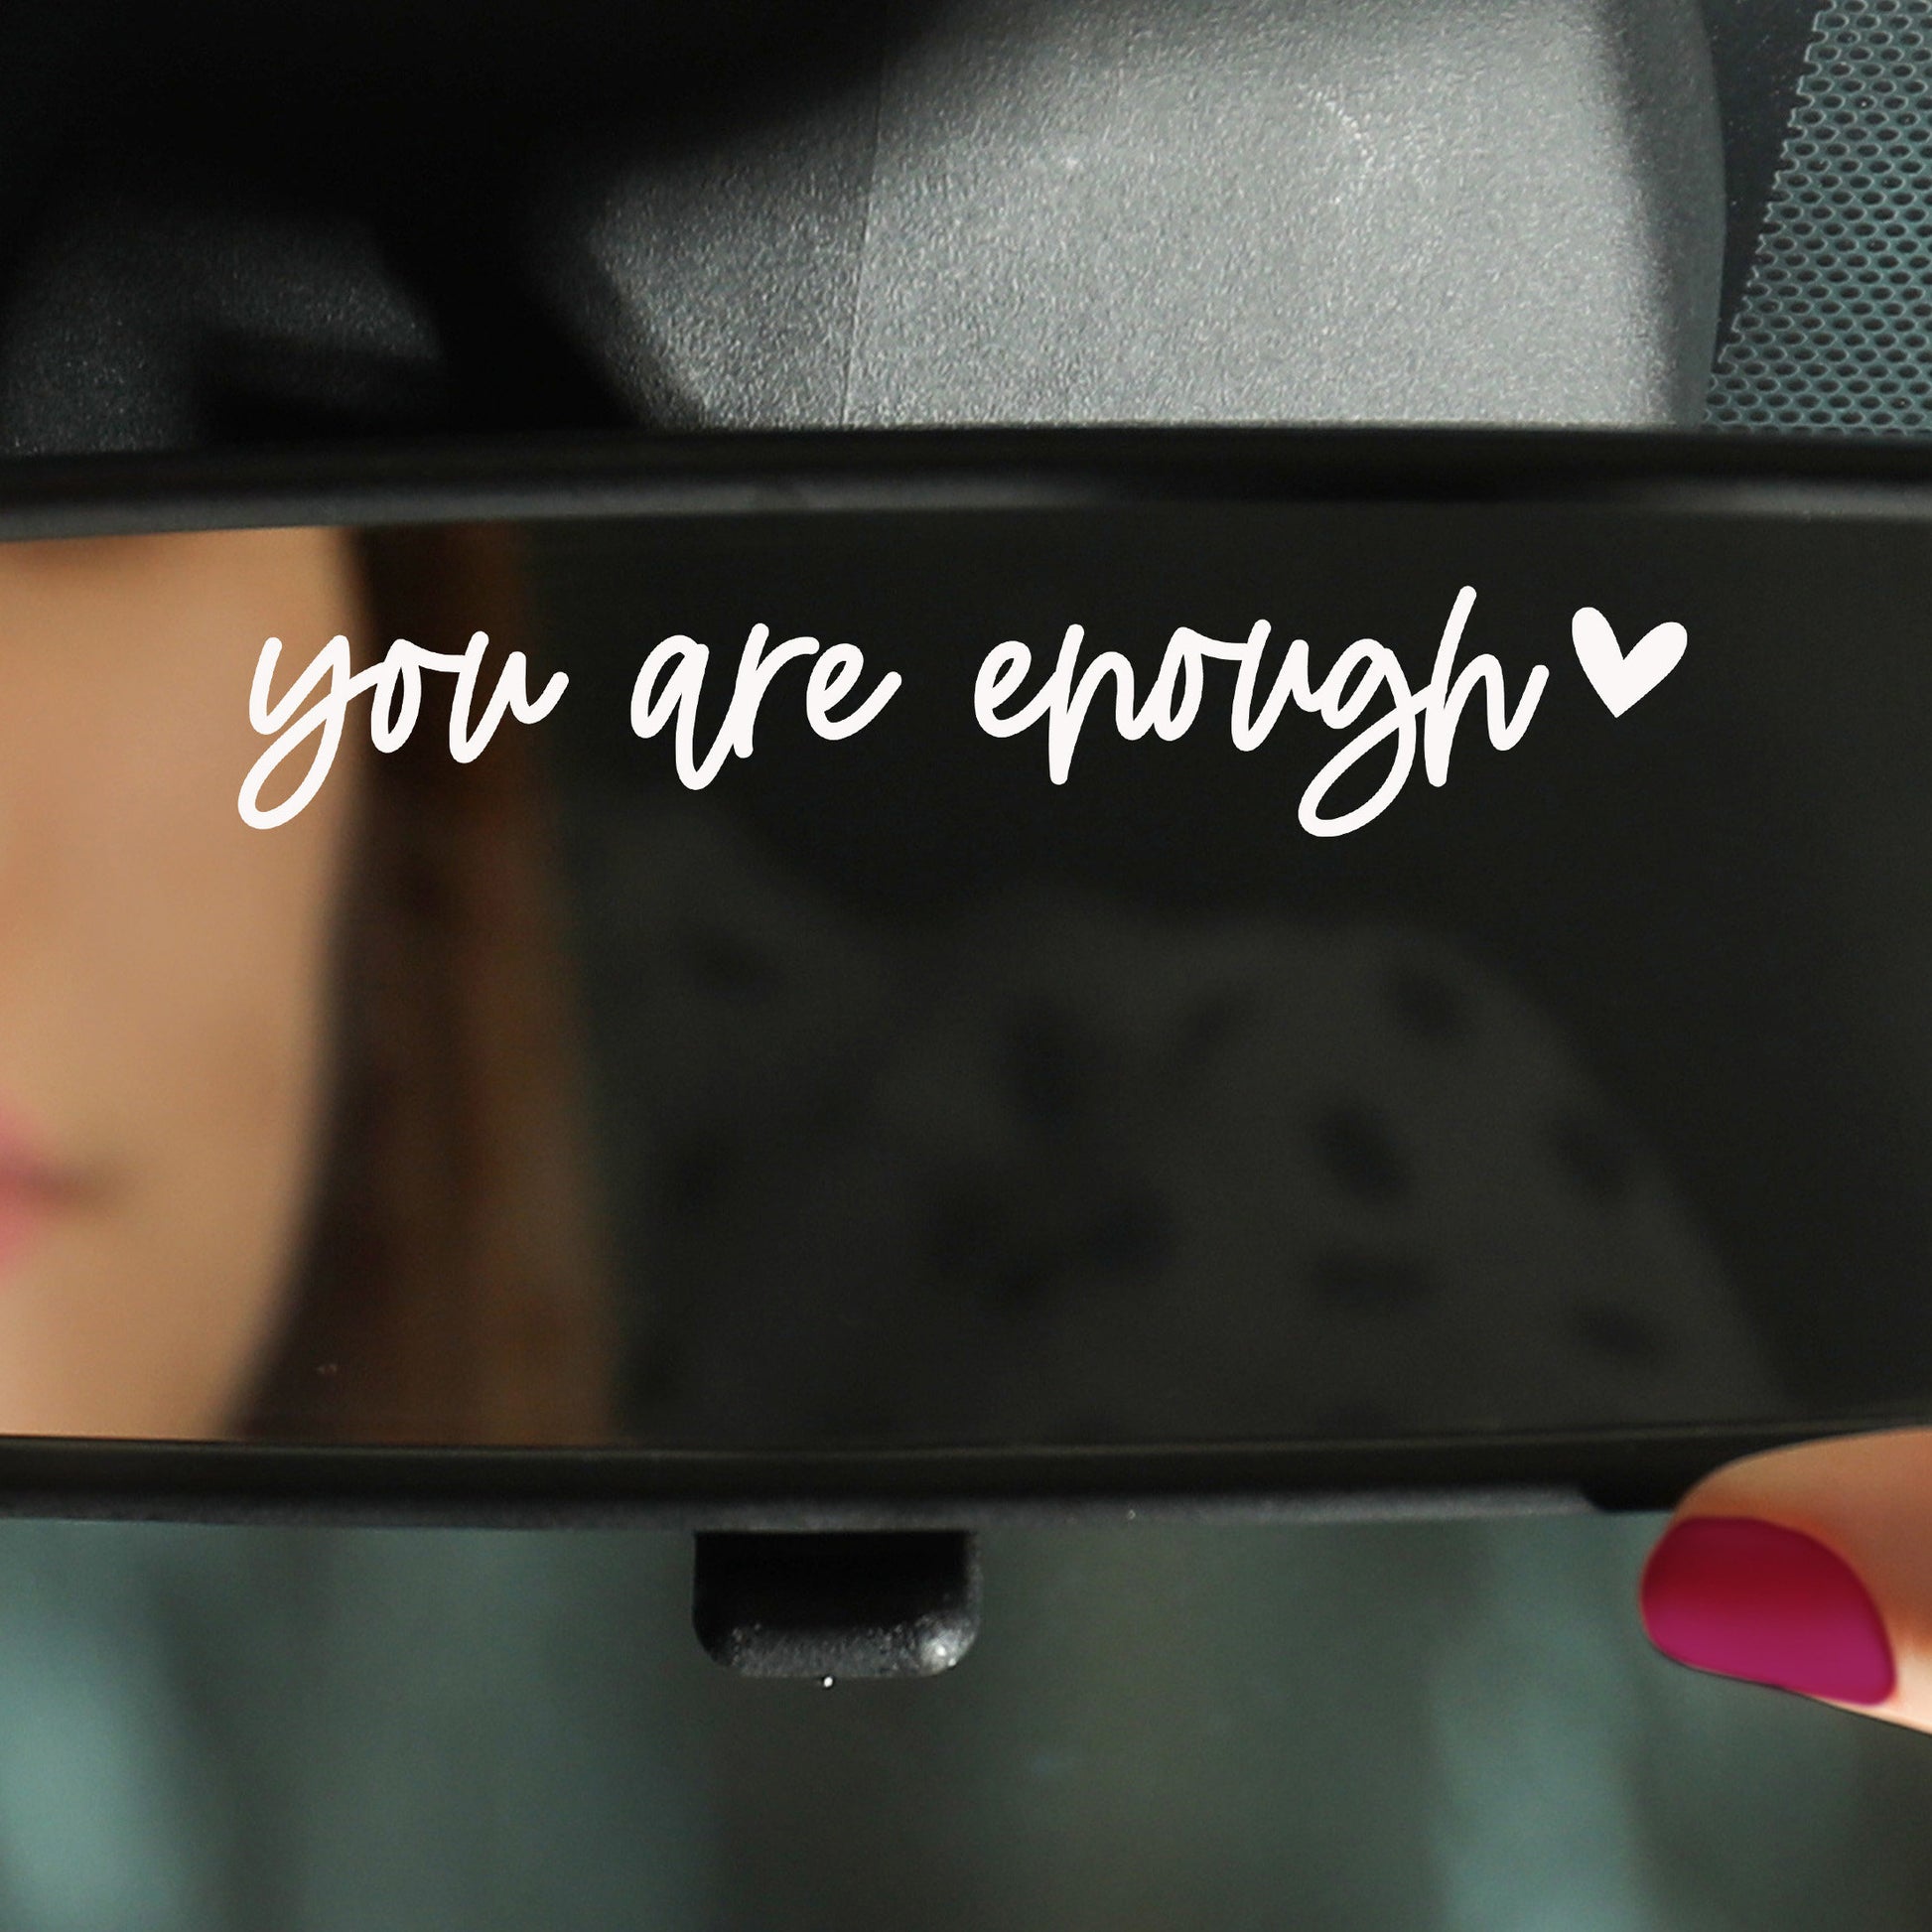 You Are Enough Mirror Sticker. Positive Affirmations for Mental Health. Car Accessories Gifts.